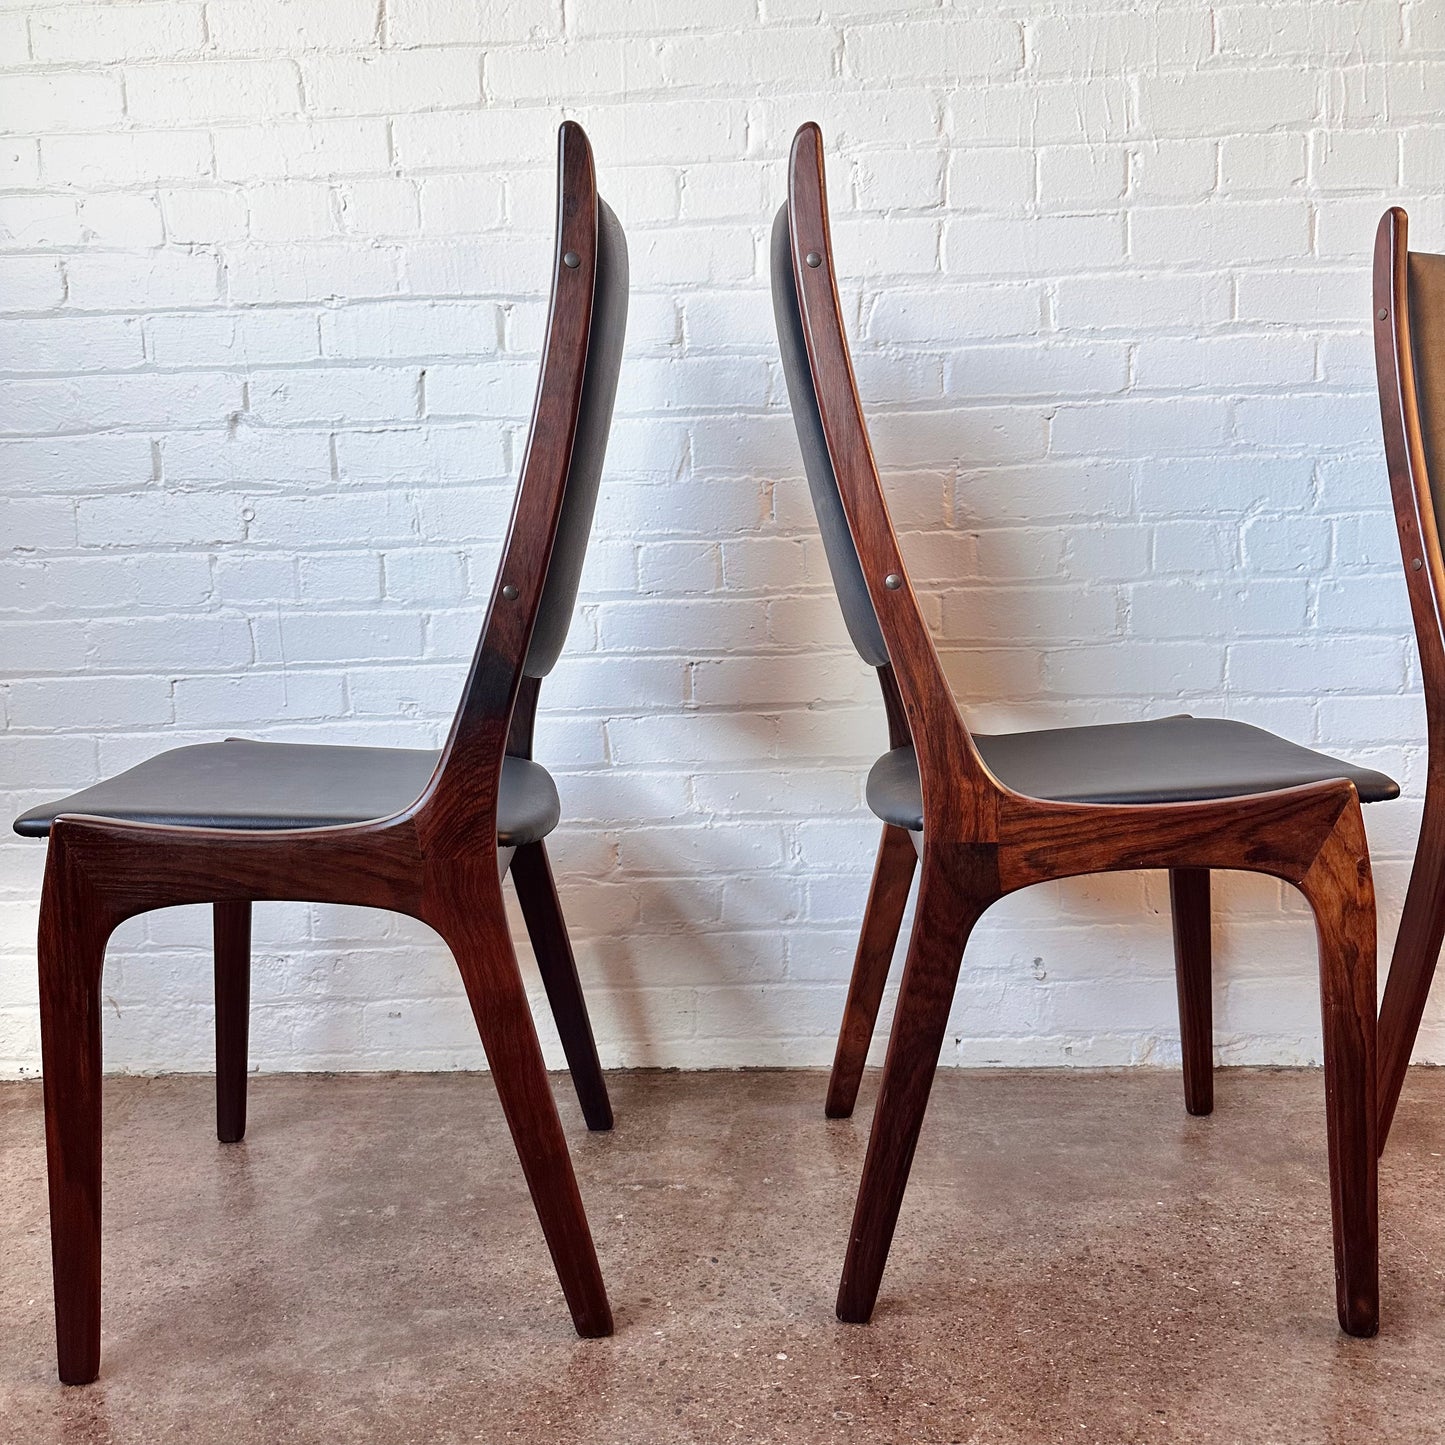 KAI KRISTENSEN ROSEWOOD DINING CHAIRS FOR K.S. MOBLER - SET OF 6